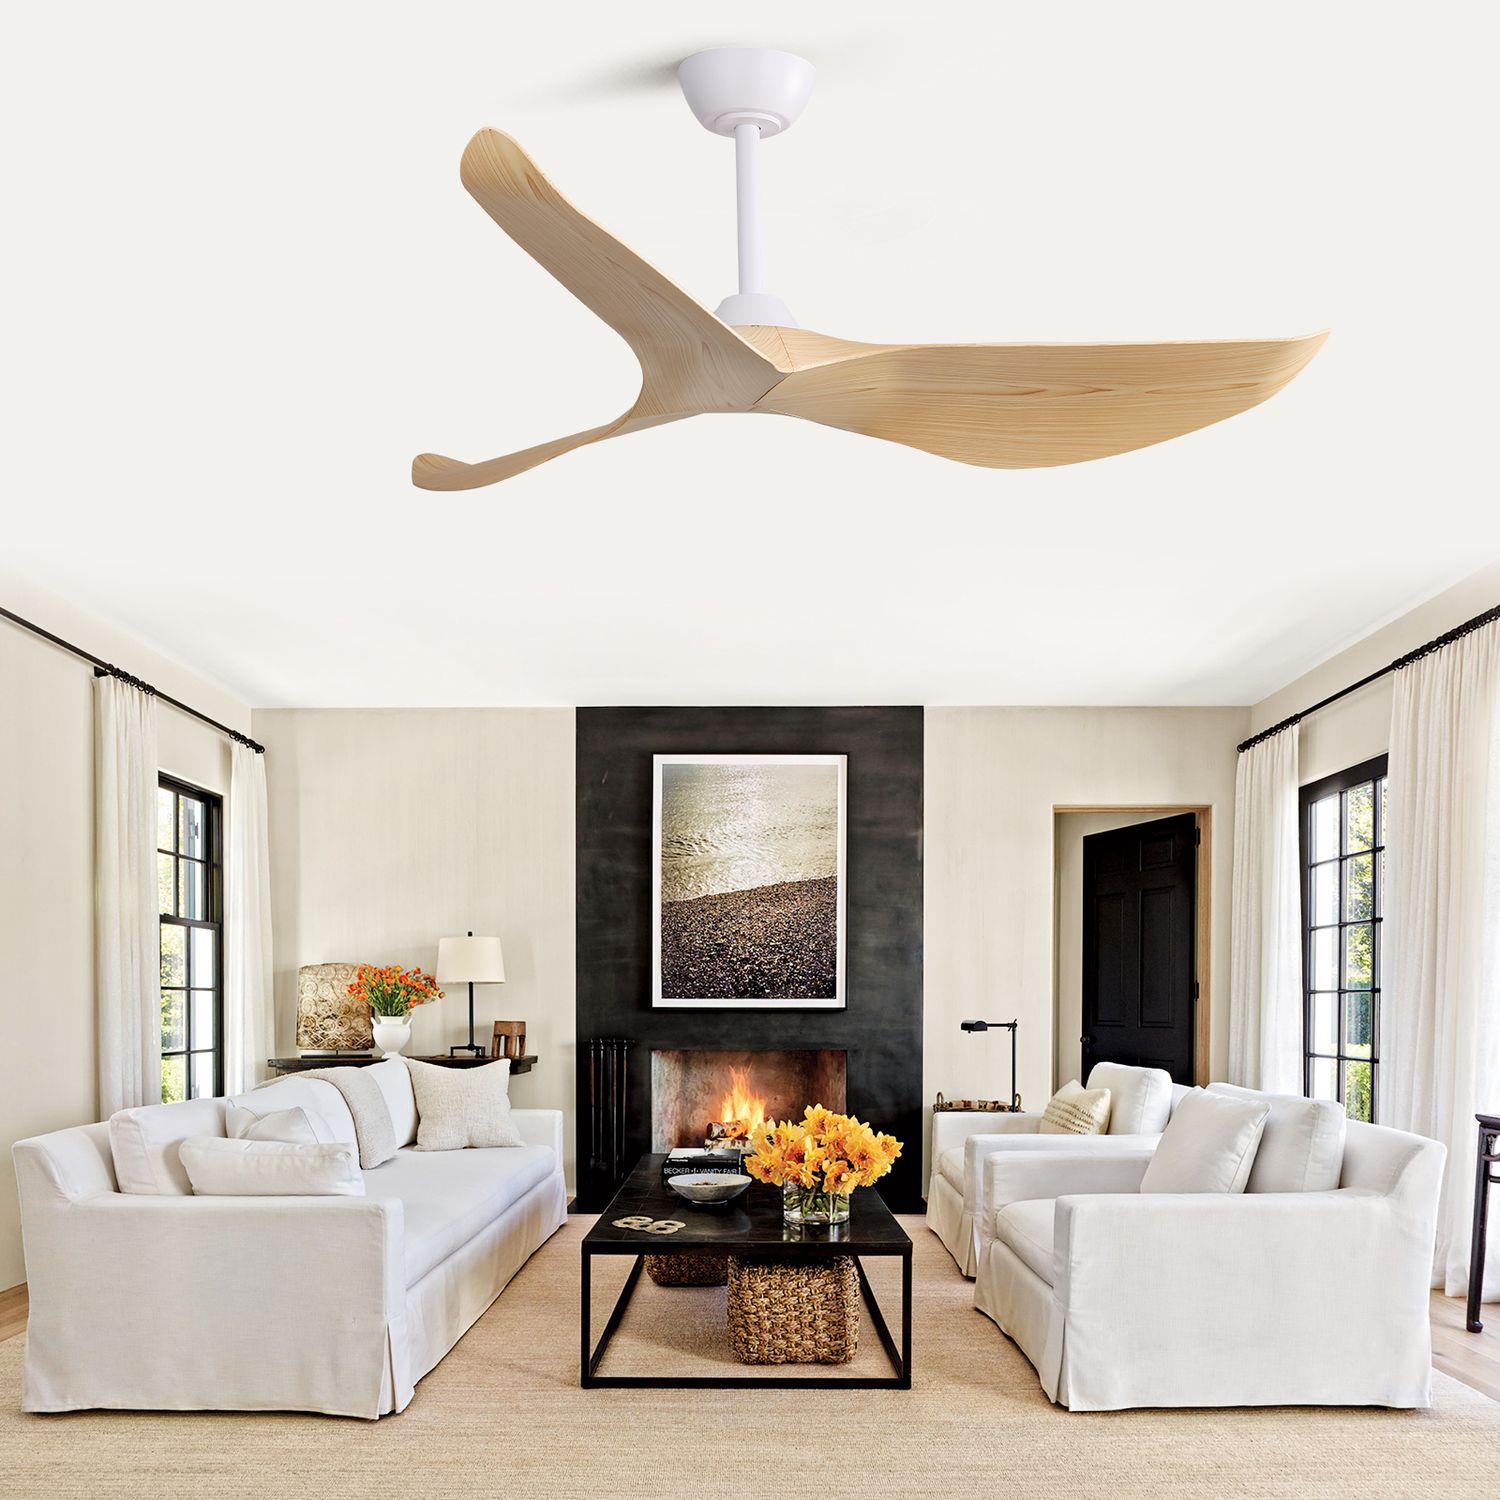 Low Profile Reversible Solid Wood Ceiling Fan in living room